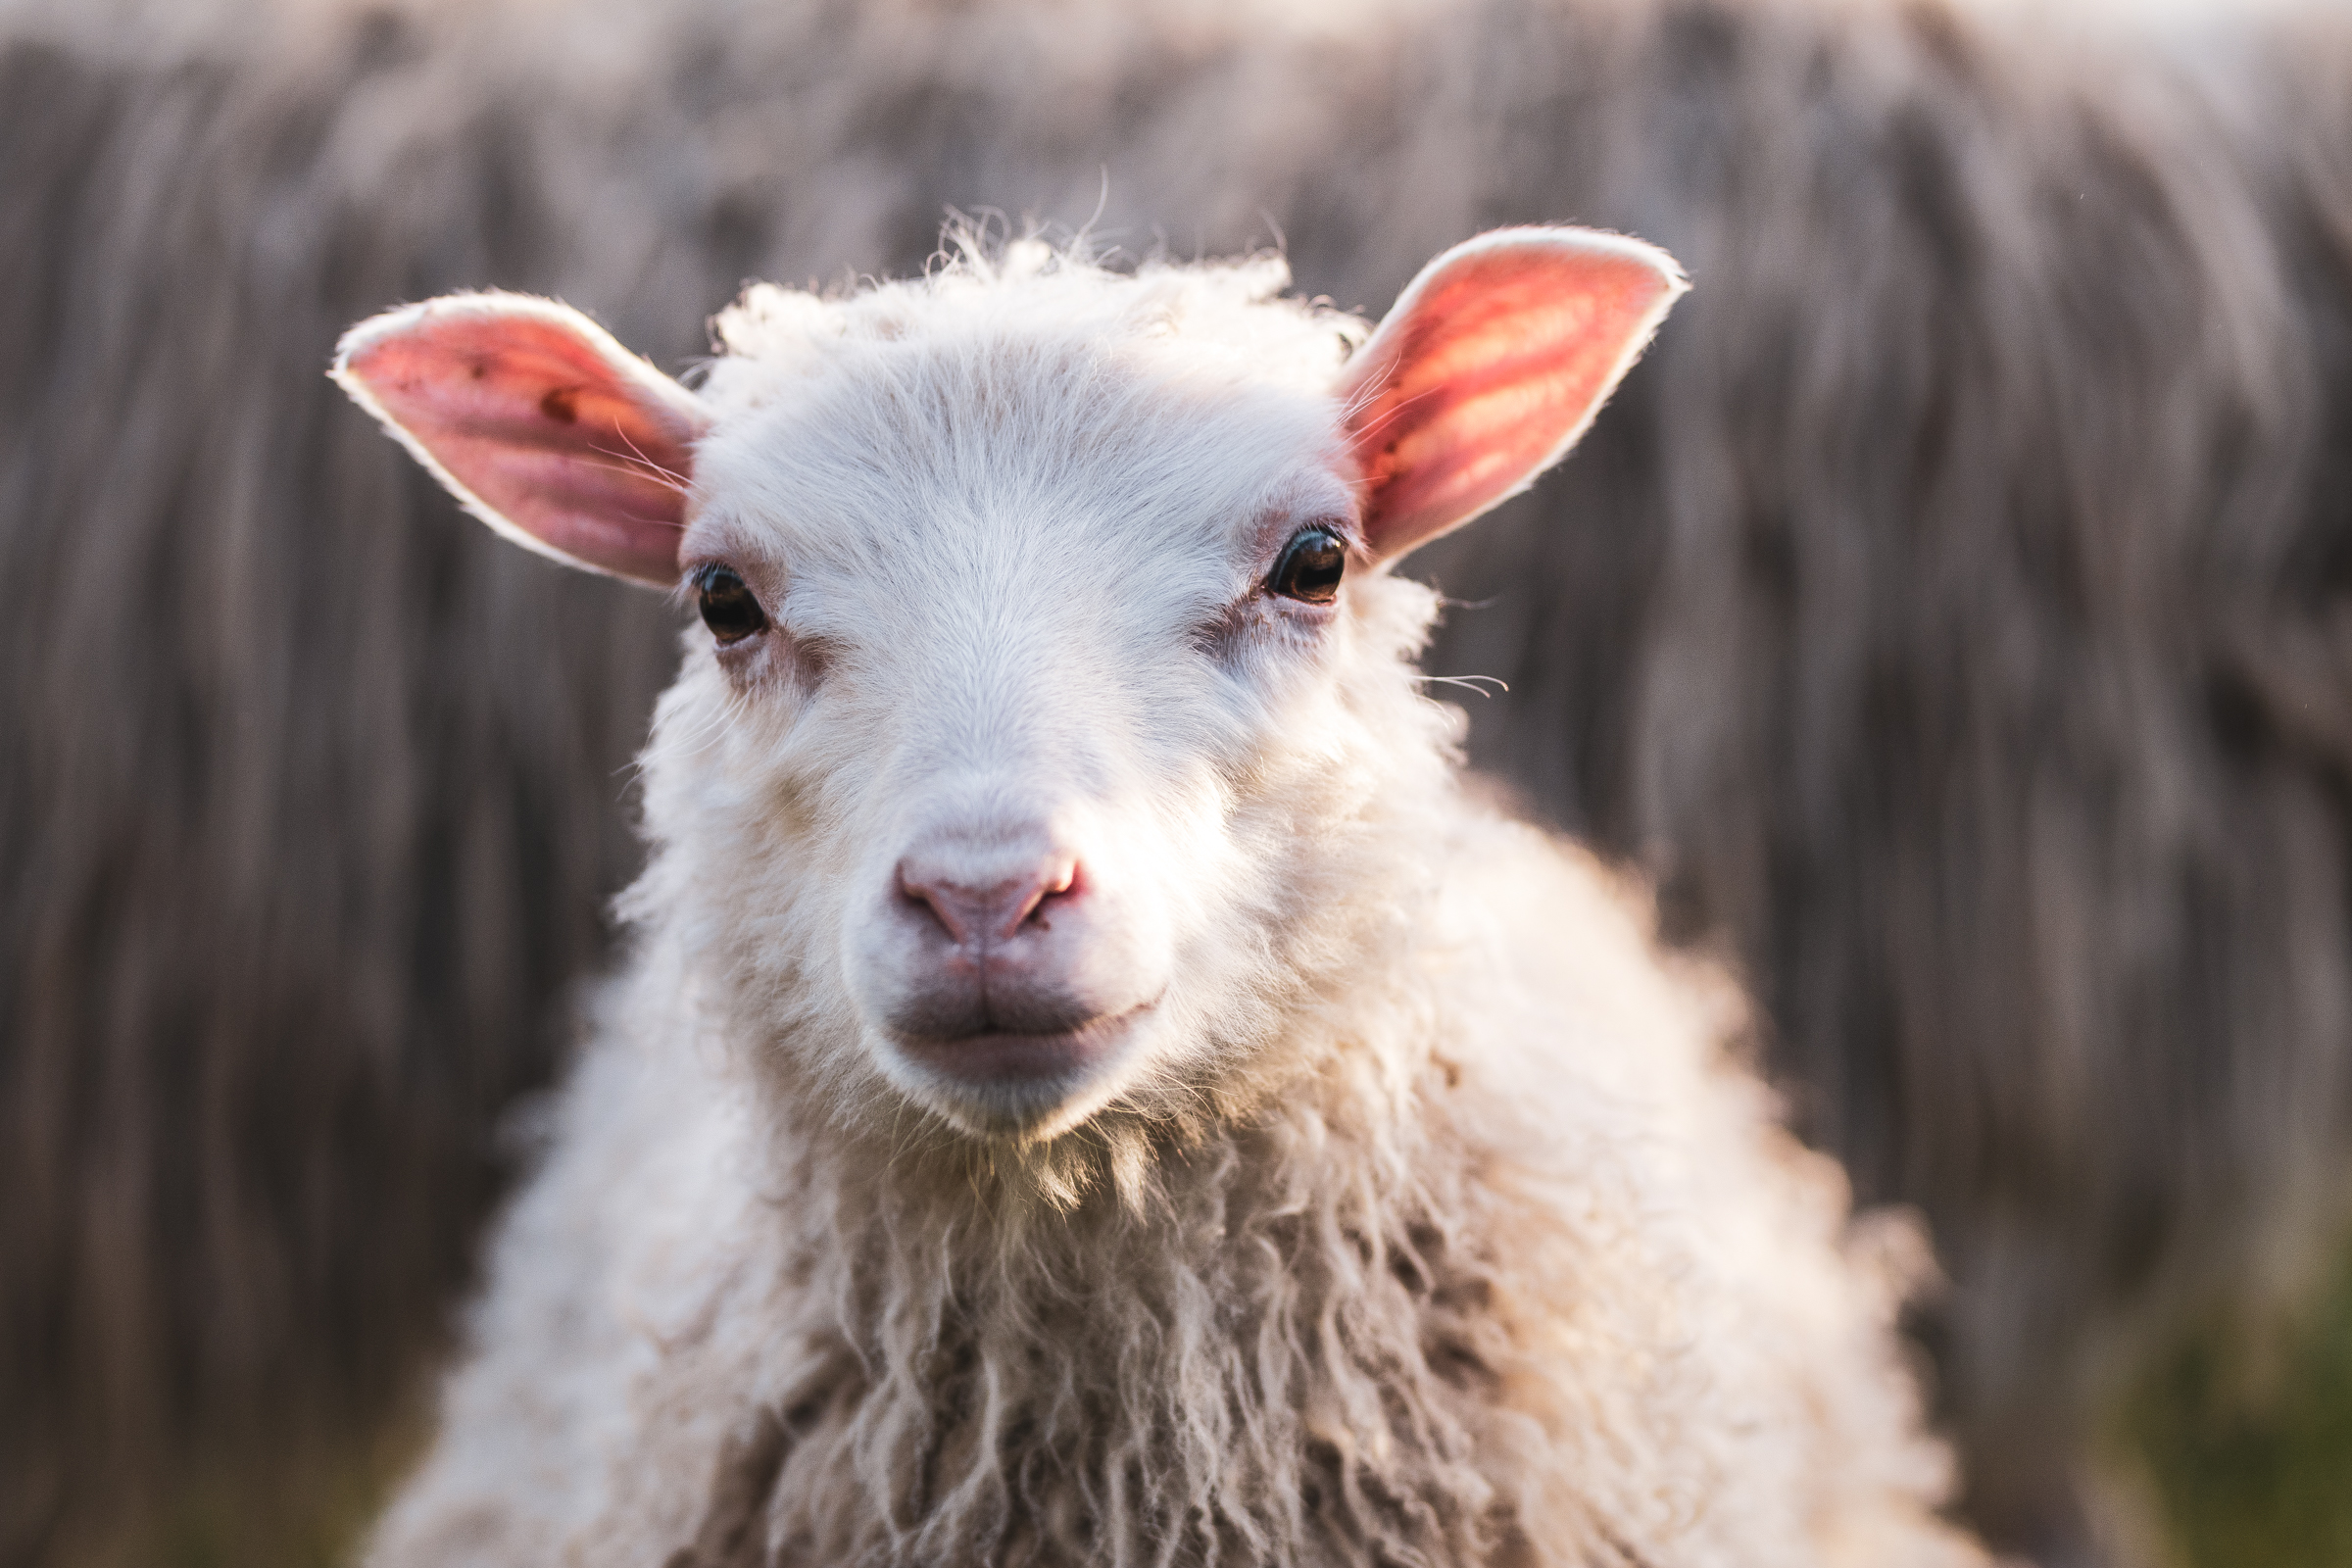 A young sheep looking directly into the camera. It appears to be smiling.